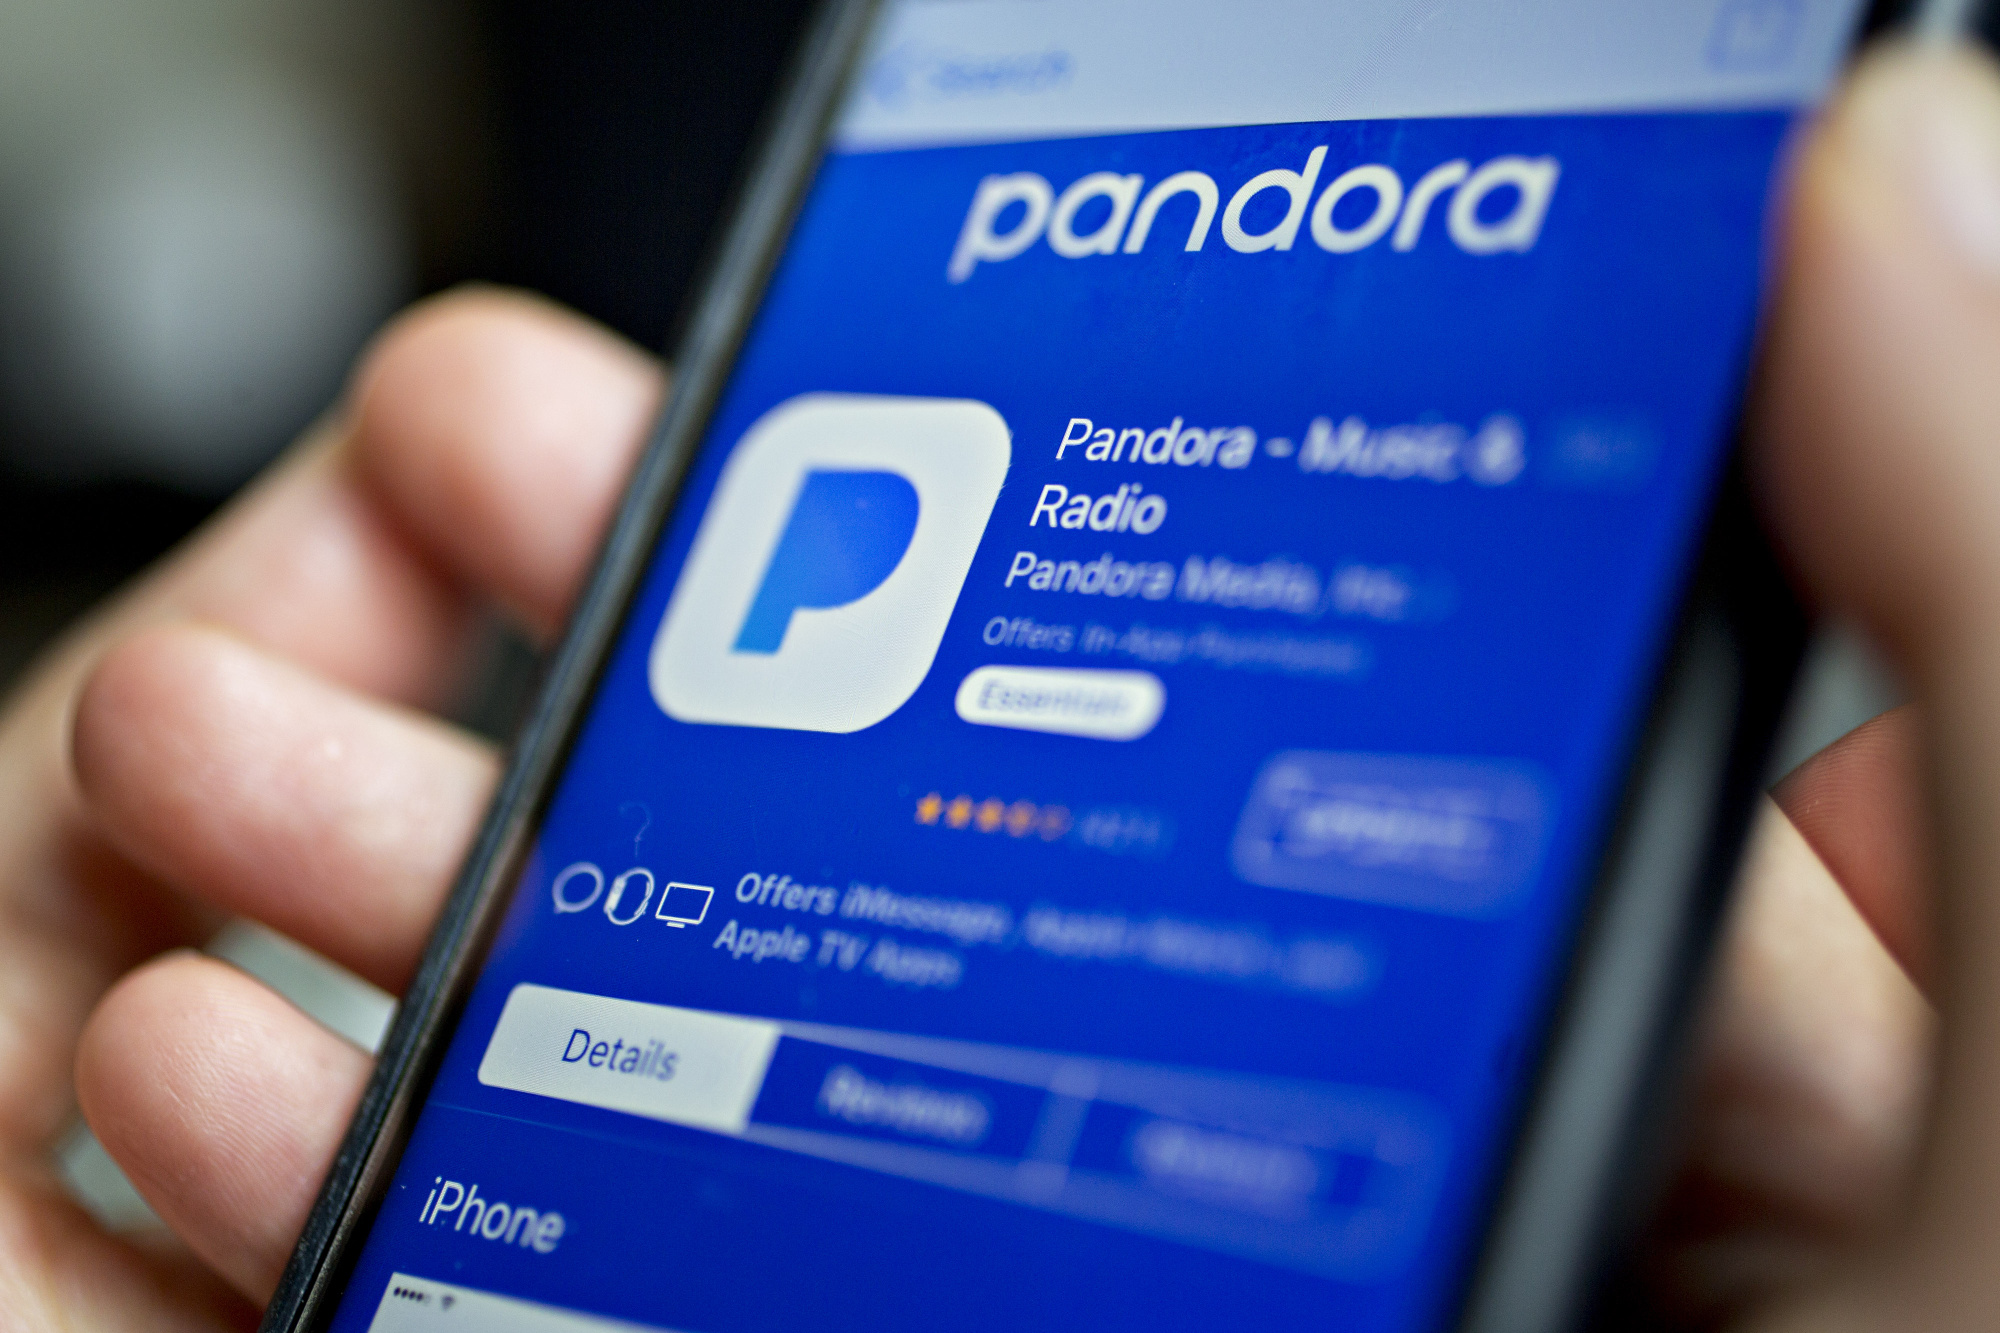 The Pandora Media Inc. application is seen in the App Store on an Apple Inc. iPhone in an arranged photograph taken in Washington, D.C., U.S., on Friday, May 5, 2017. Pandora is scheduled to release first-quarter earnings figures on May 8.